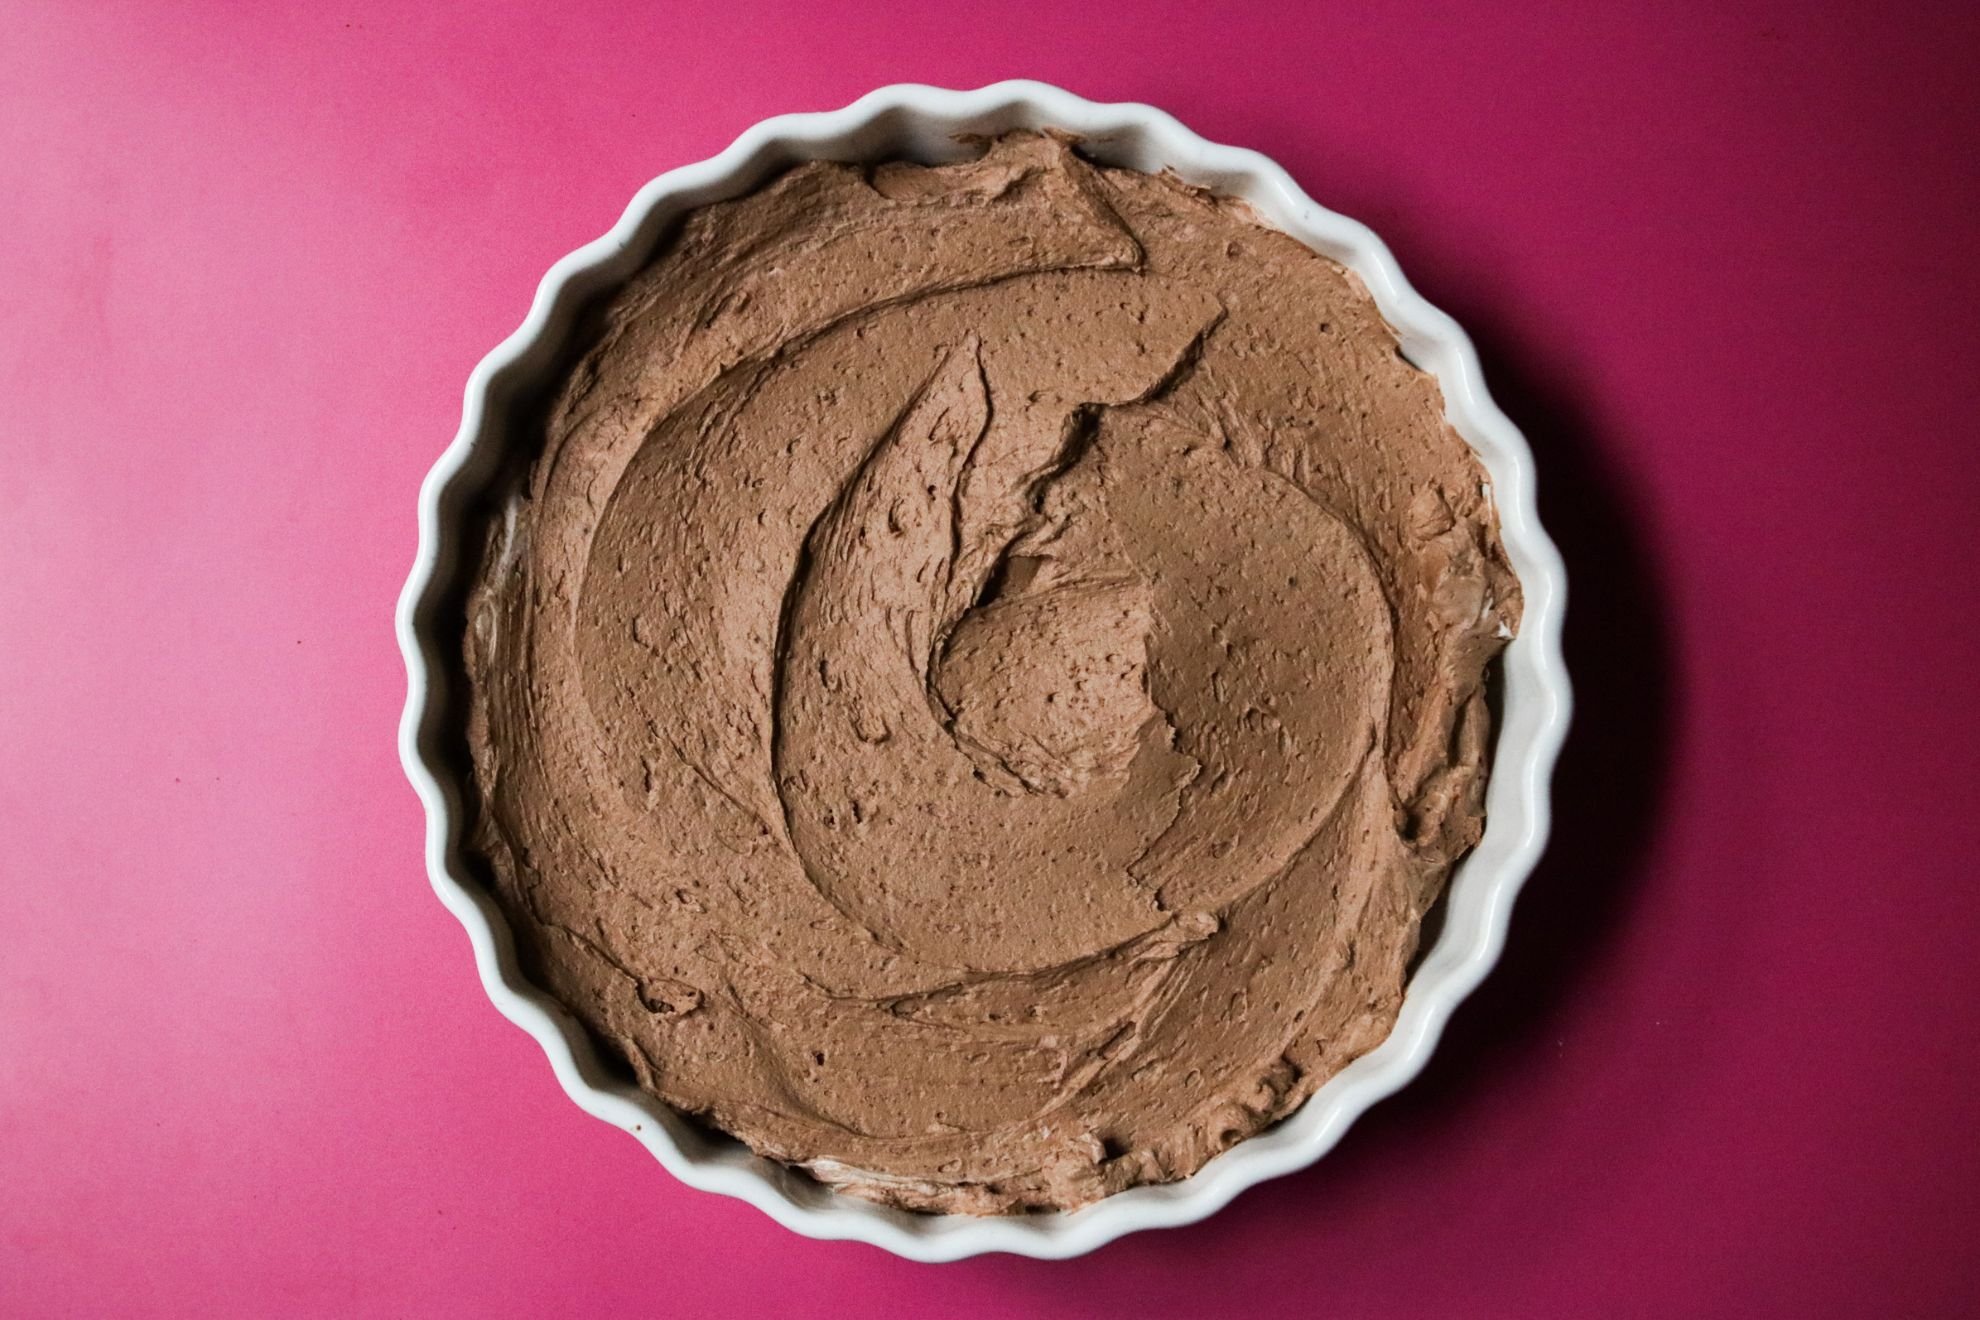 This is an overhead horizontal image of a white ceramic scalloped pie dish sitting on a deep pink surface. In the pie dish is a chocolate mousse spread out in an even layer across the bottom of the dish.